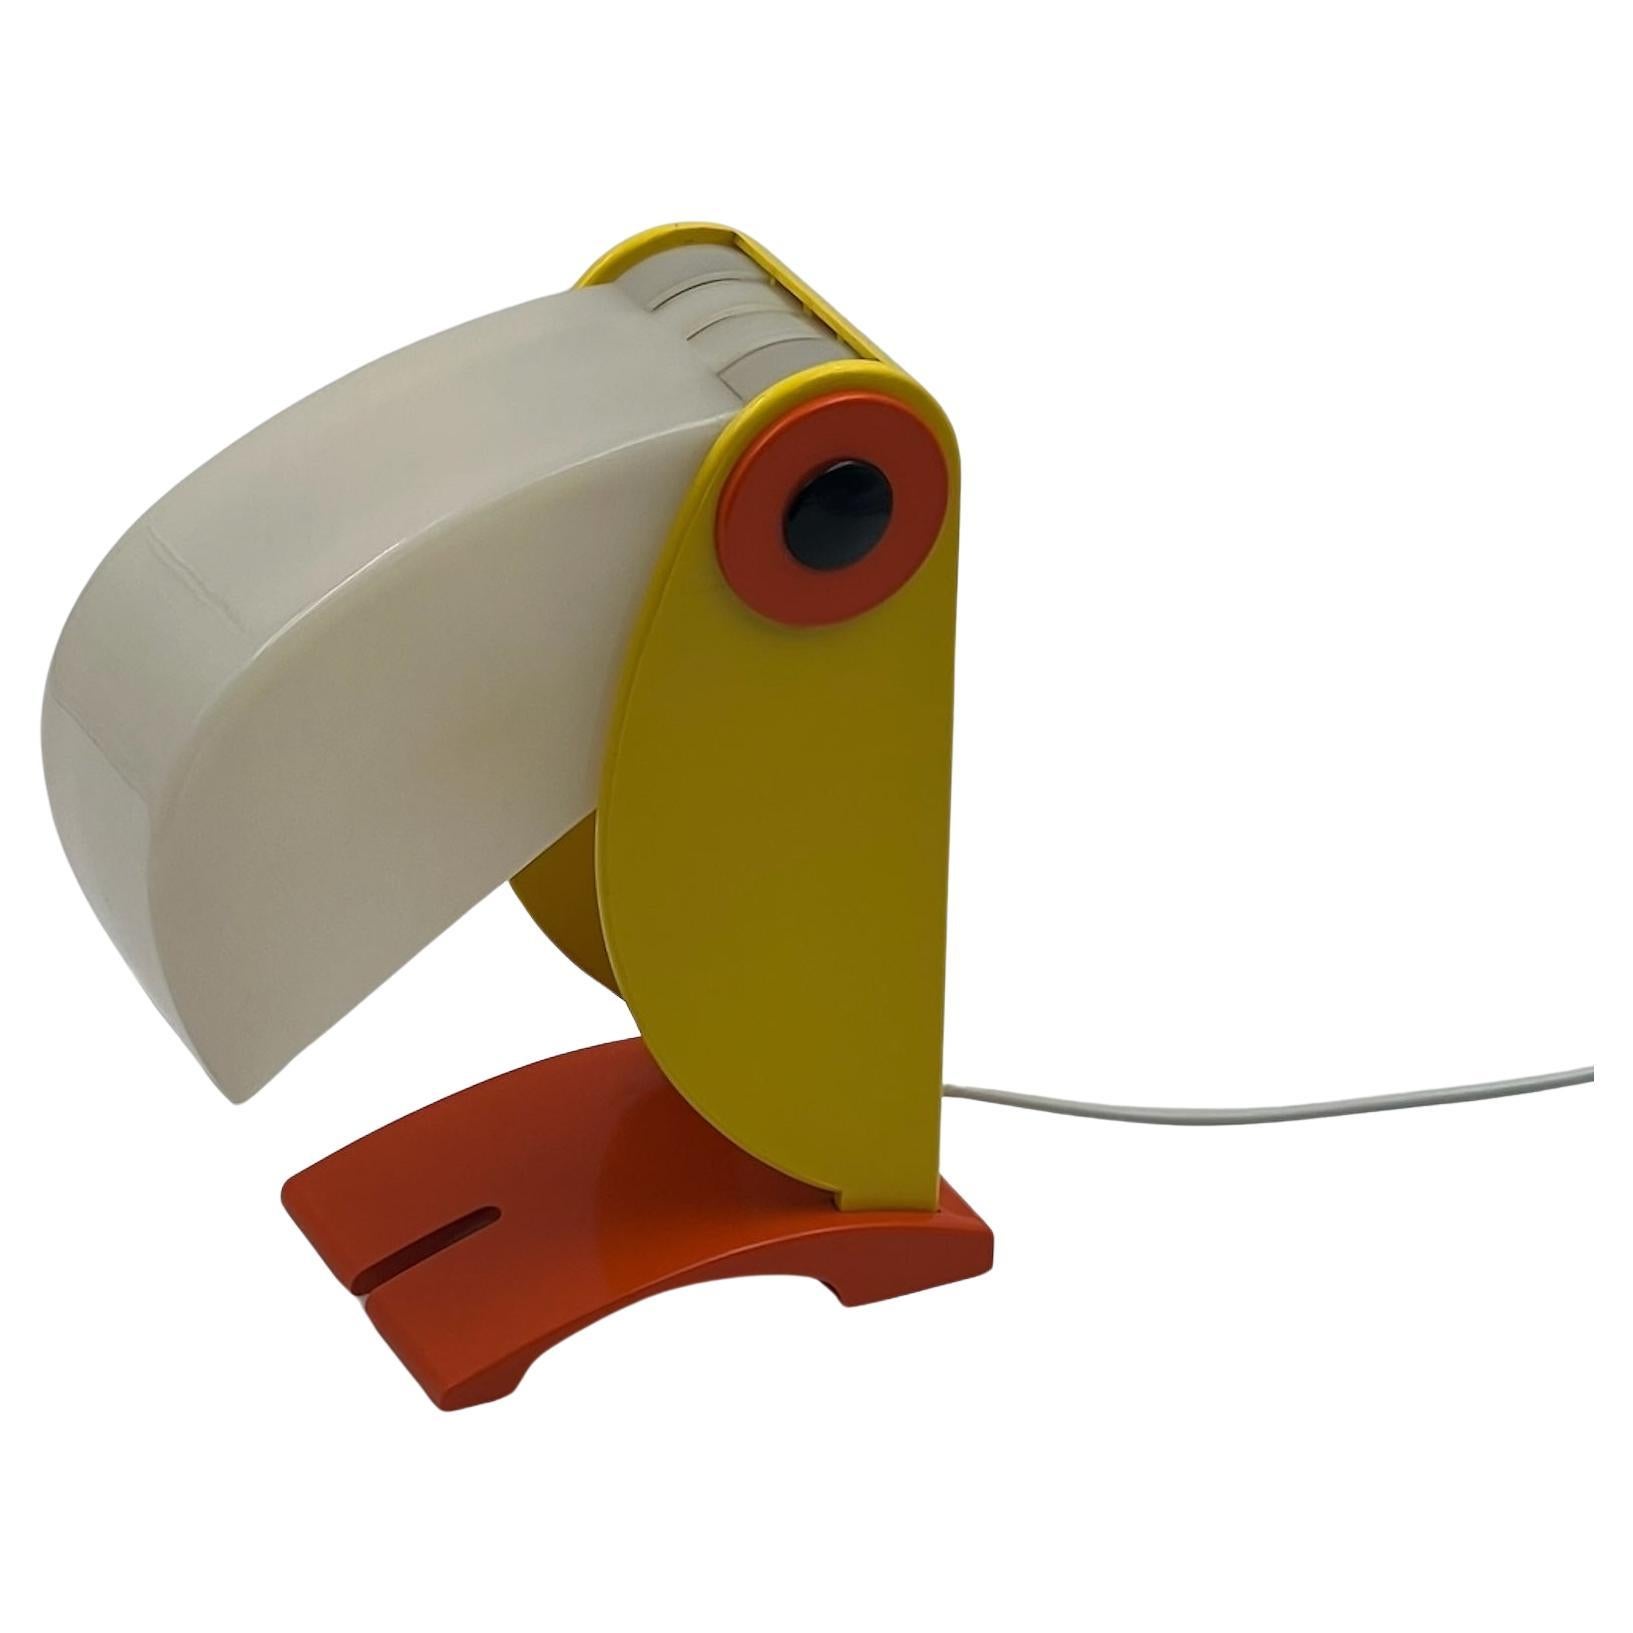 Iconic Toucan Lamp by Enea Ferrari - Vintage 70s Old Timer Lighting Masterpiece 